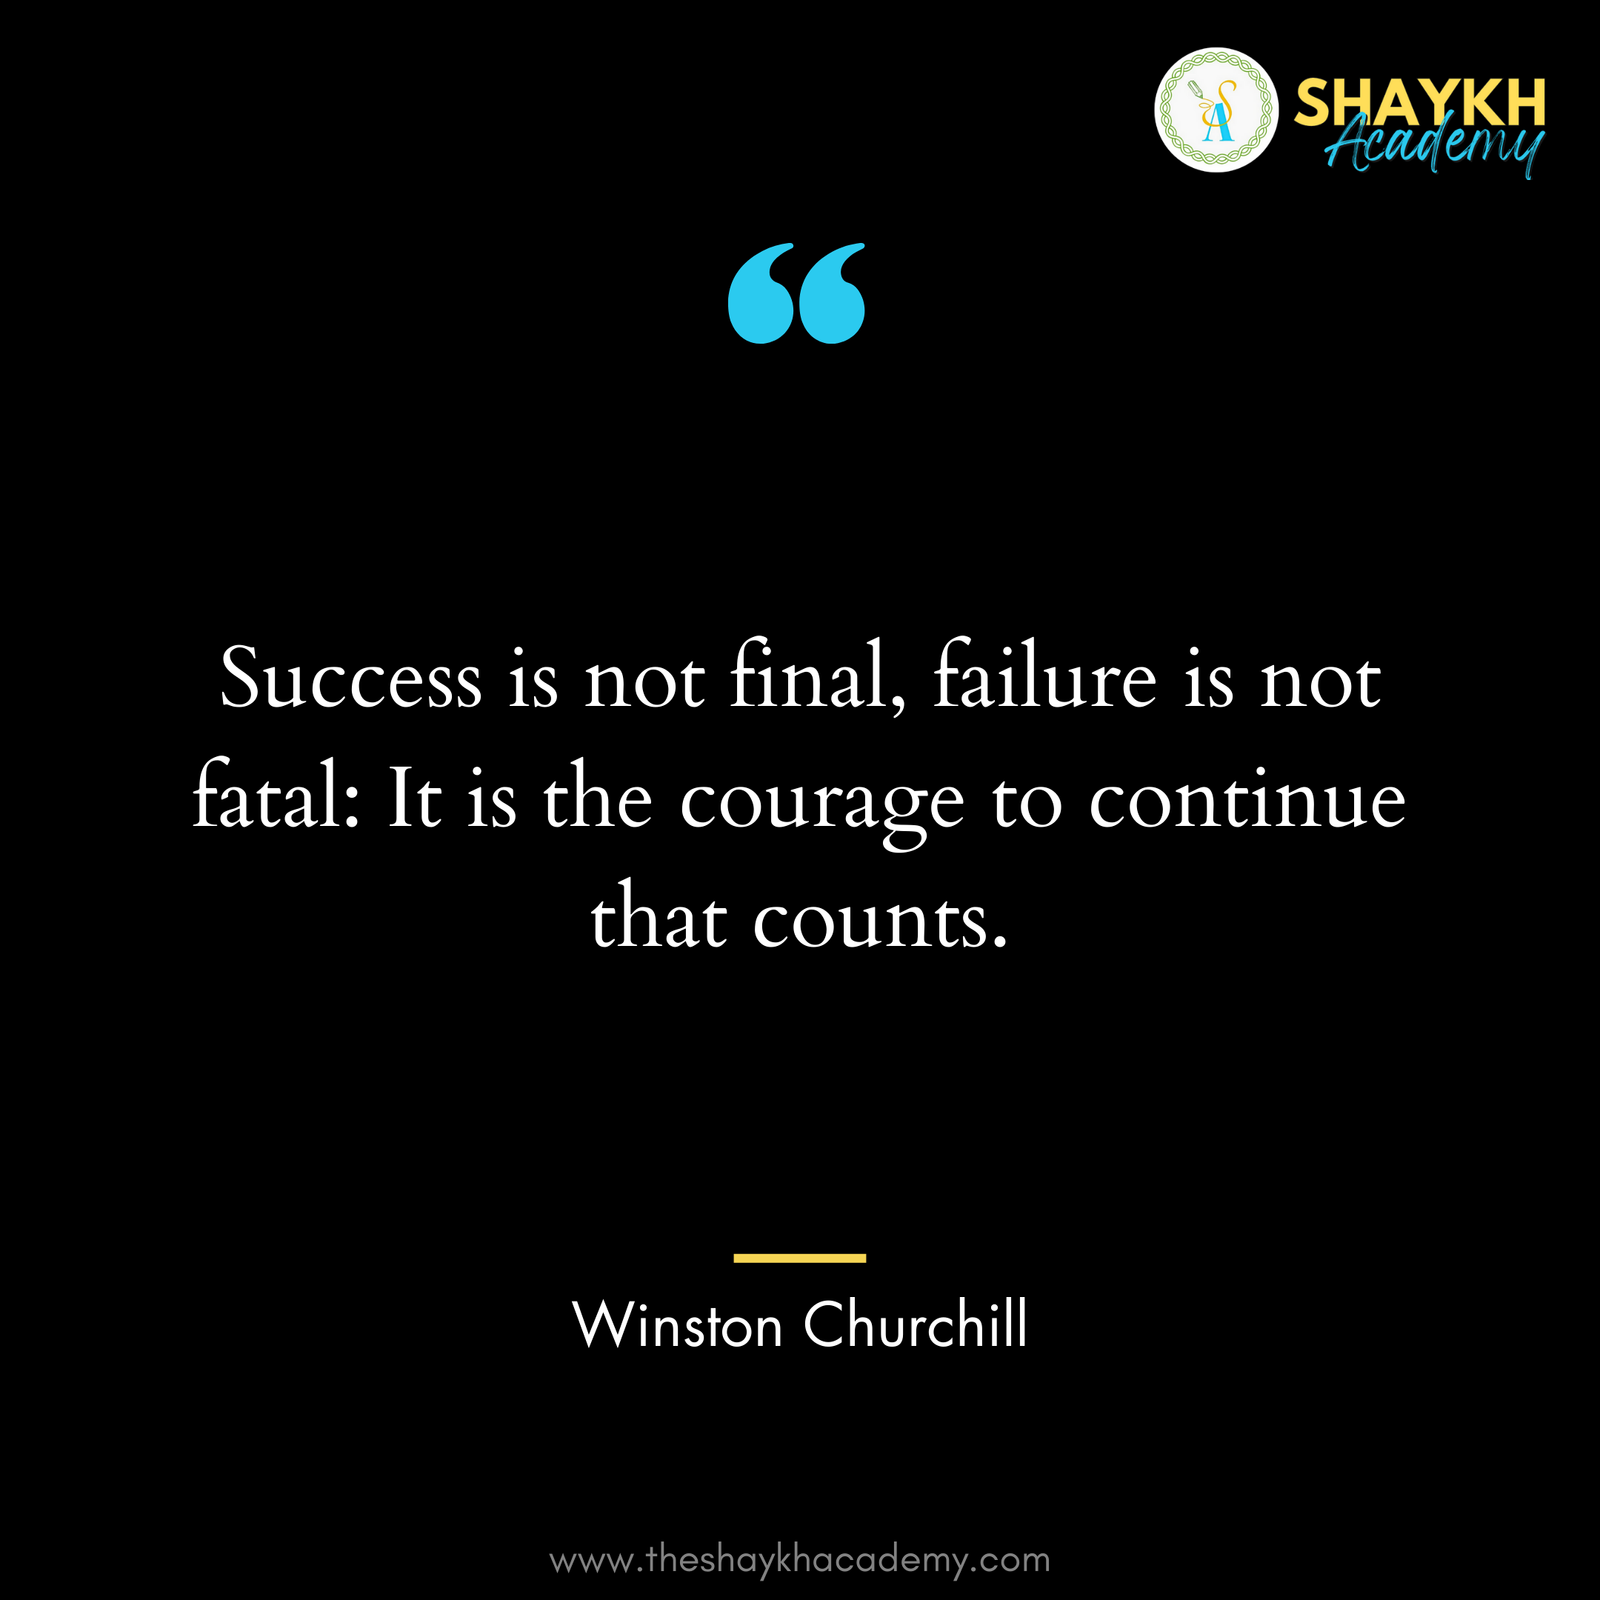 Success is not final, failure is not fatal: It is the courage to continue that counts